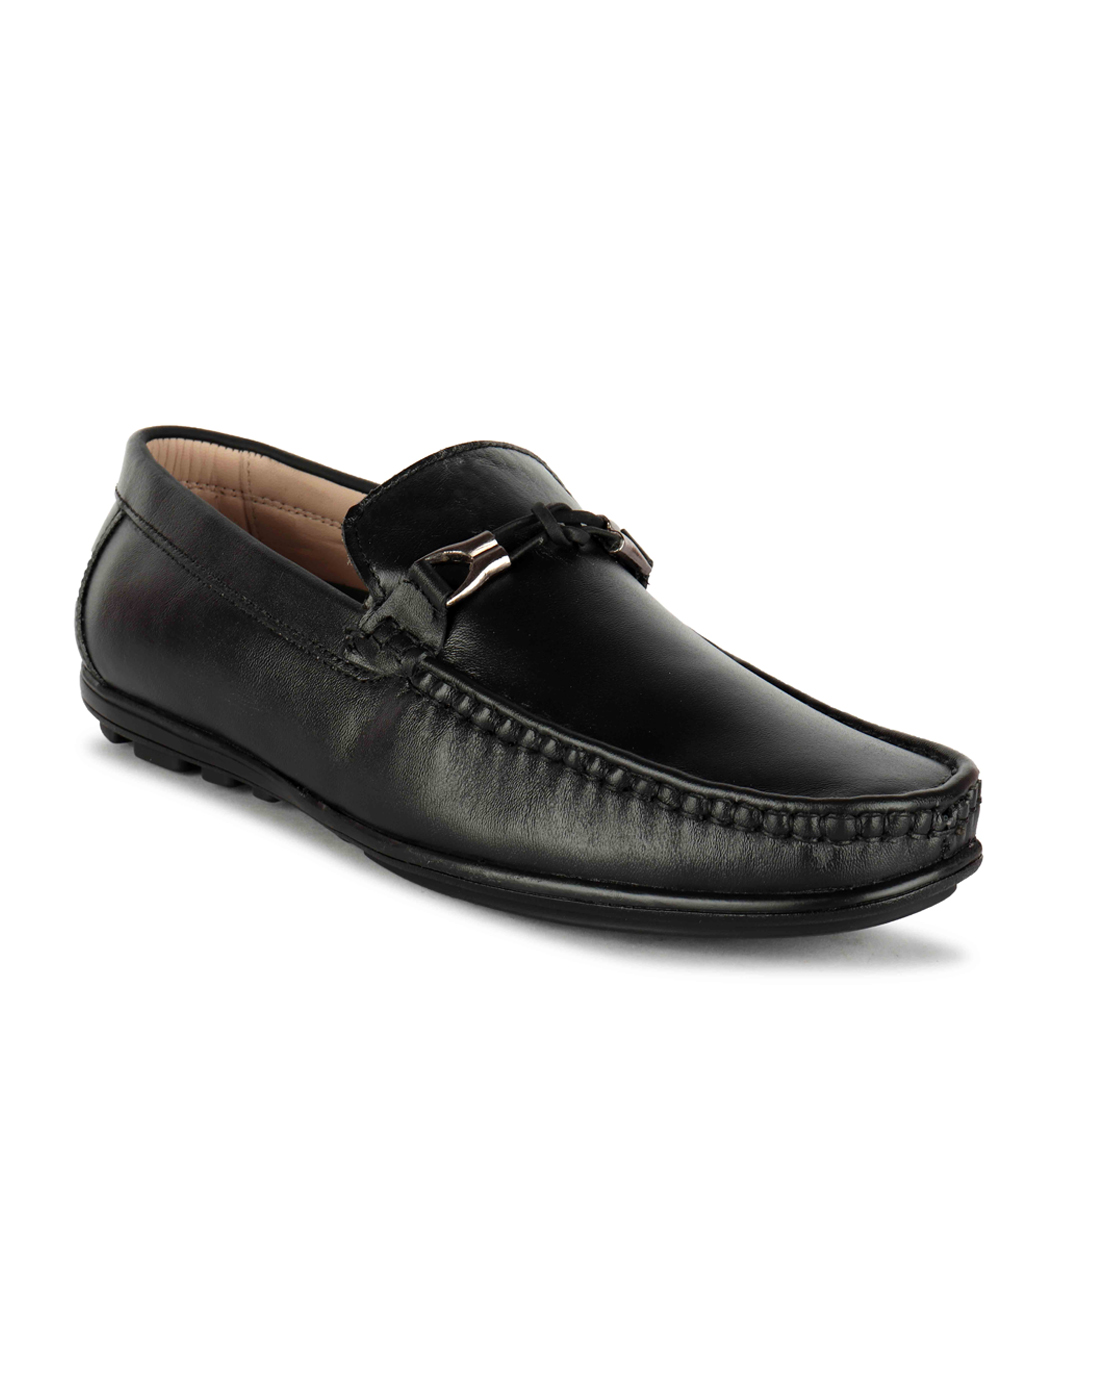 Black Loafers - Buy Black Pure Leather Loafers : Article-231